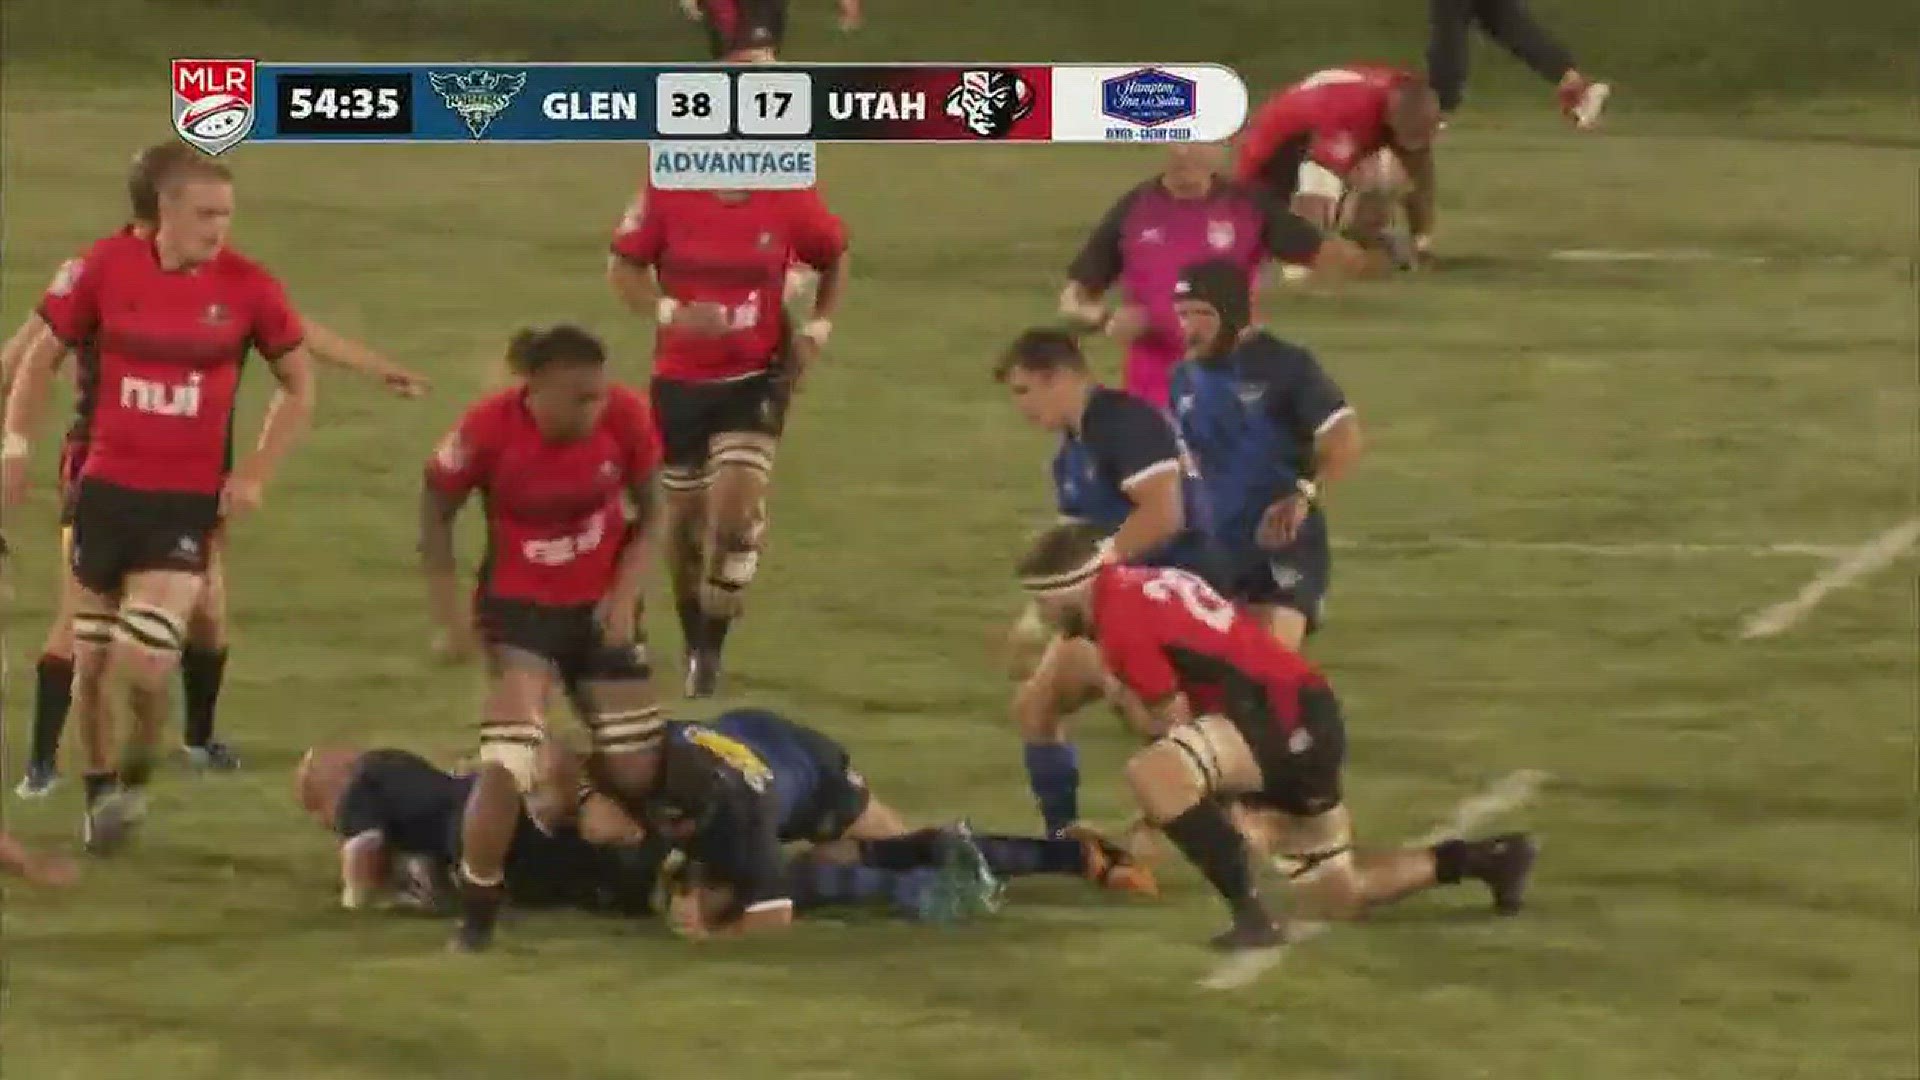 The Glendale Raptors are a professional rugby union based in the small Colorado city of Glendale.